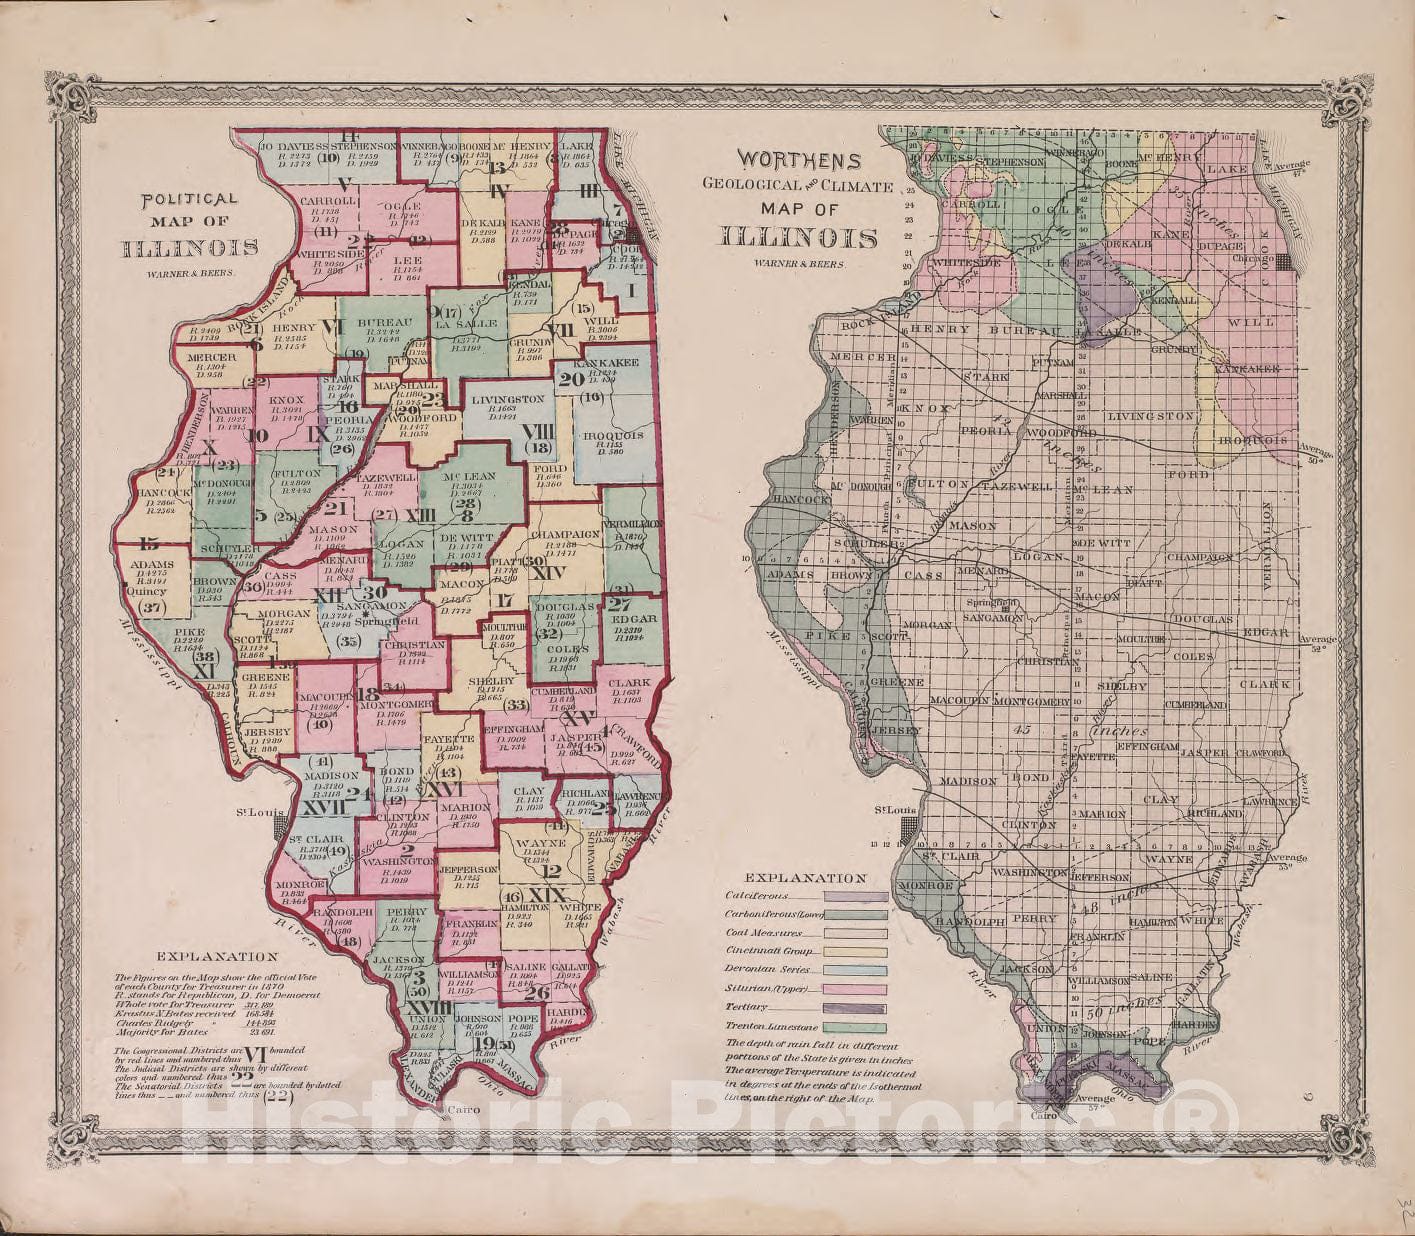 Historic 1870 Map - Atlas of Marshall Co. and The State of Illinois - Political map of Illinois - Atlas of Marshall County and The State of Illinois